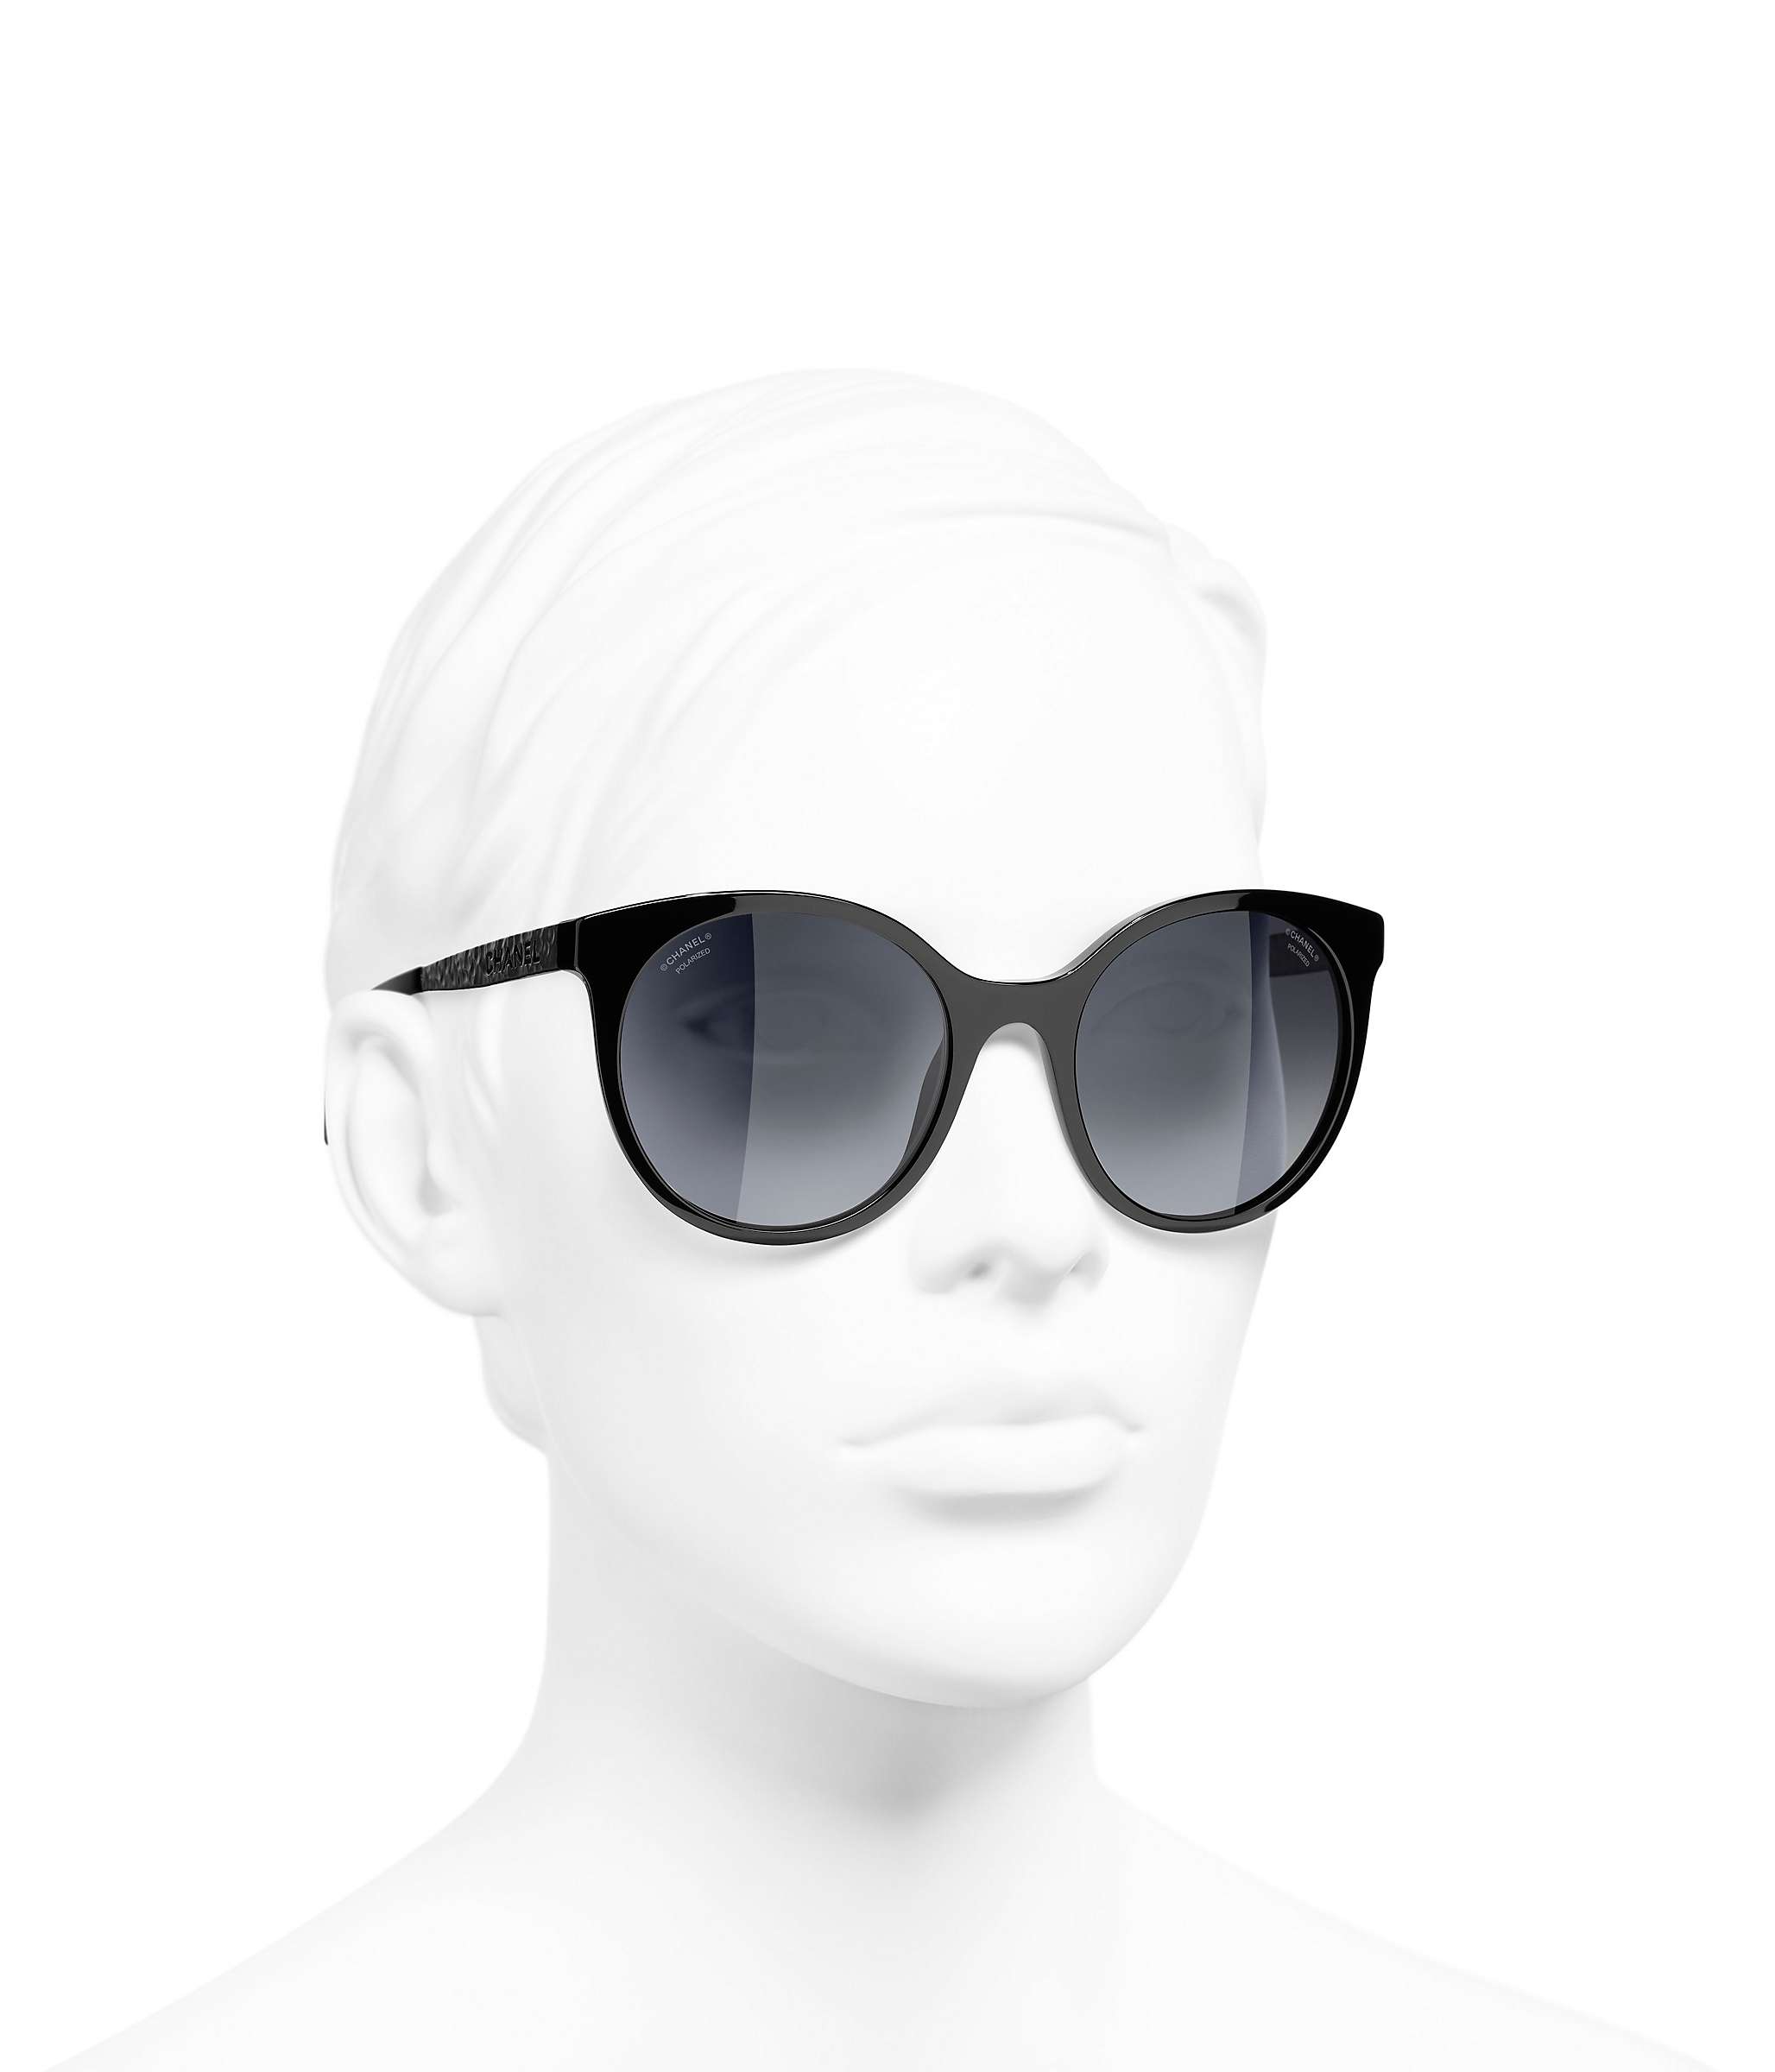 Buy CHANEL Oval Sunglasses CH5440 Black/Grey Gradient Online at johnlewis.com